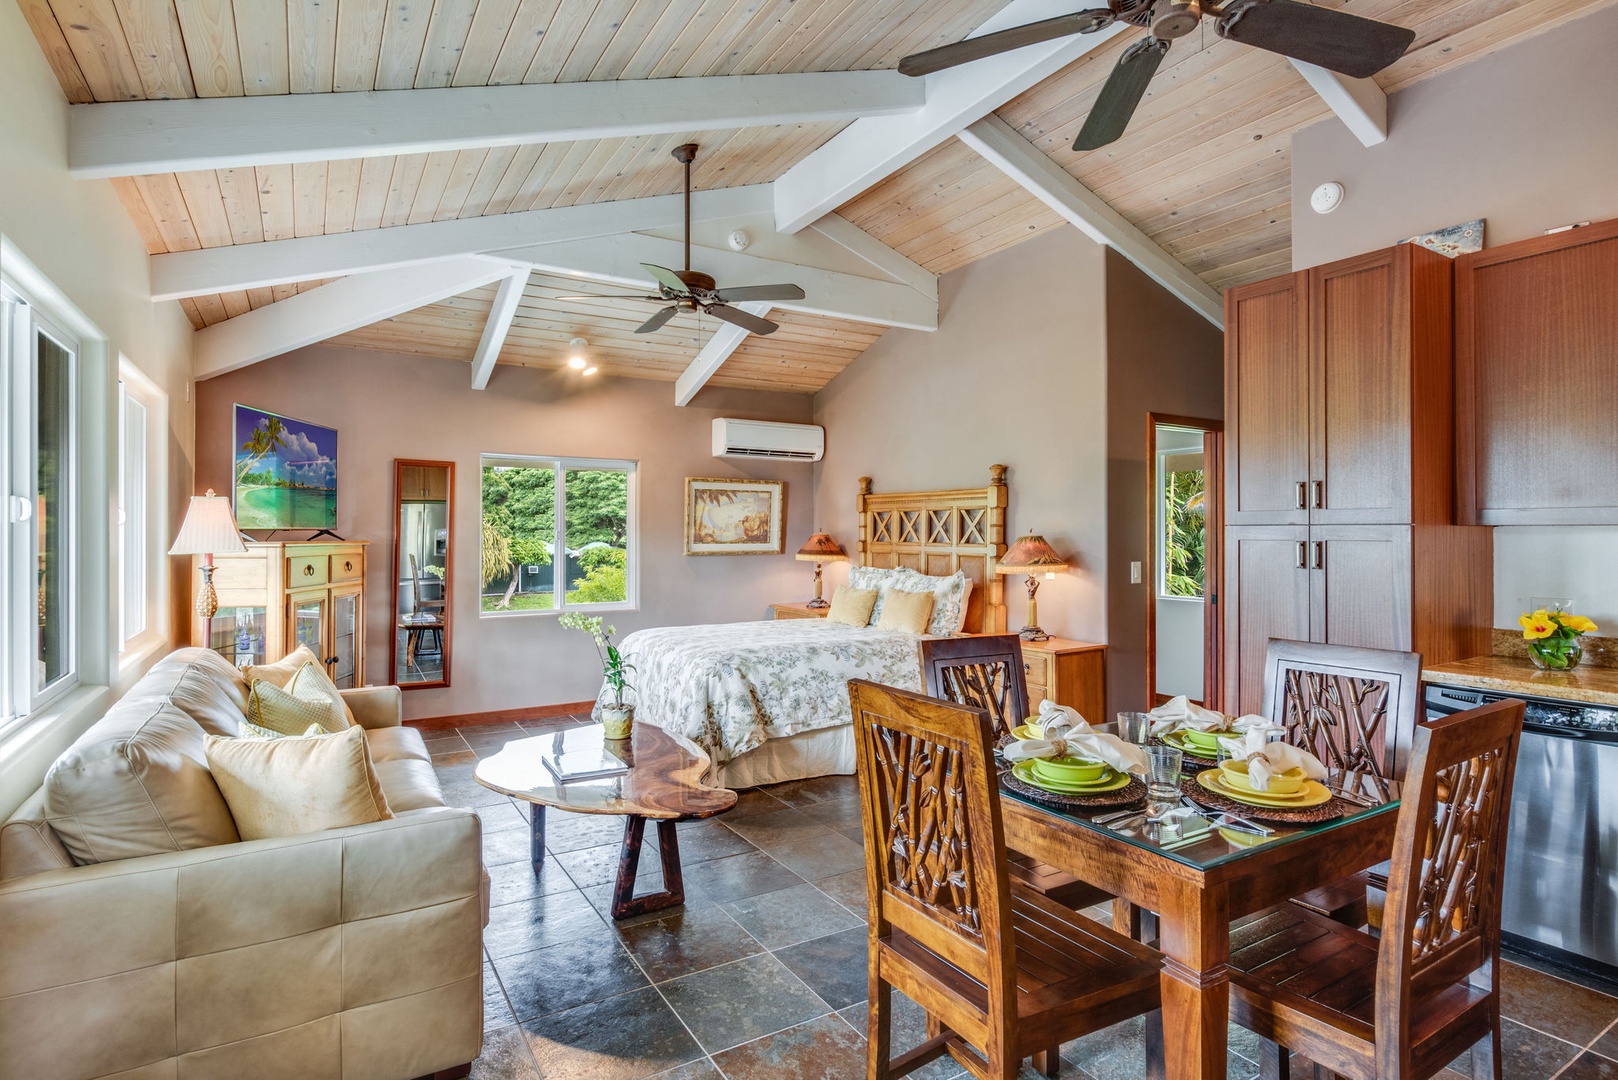 Kailua Kona Vacation Rentals, Kona Beach Bungalows** - Experience tranquility and comfort in the Hoku suite, complete with a cozy lounge and intimate dinette.